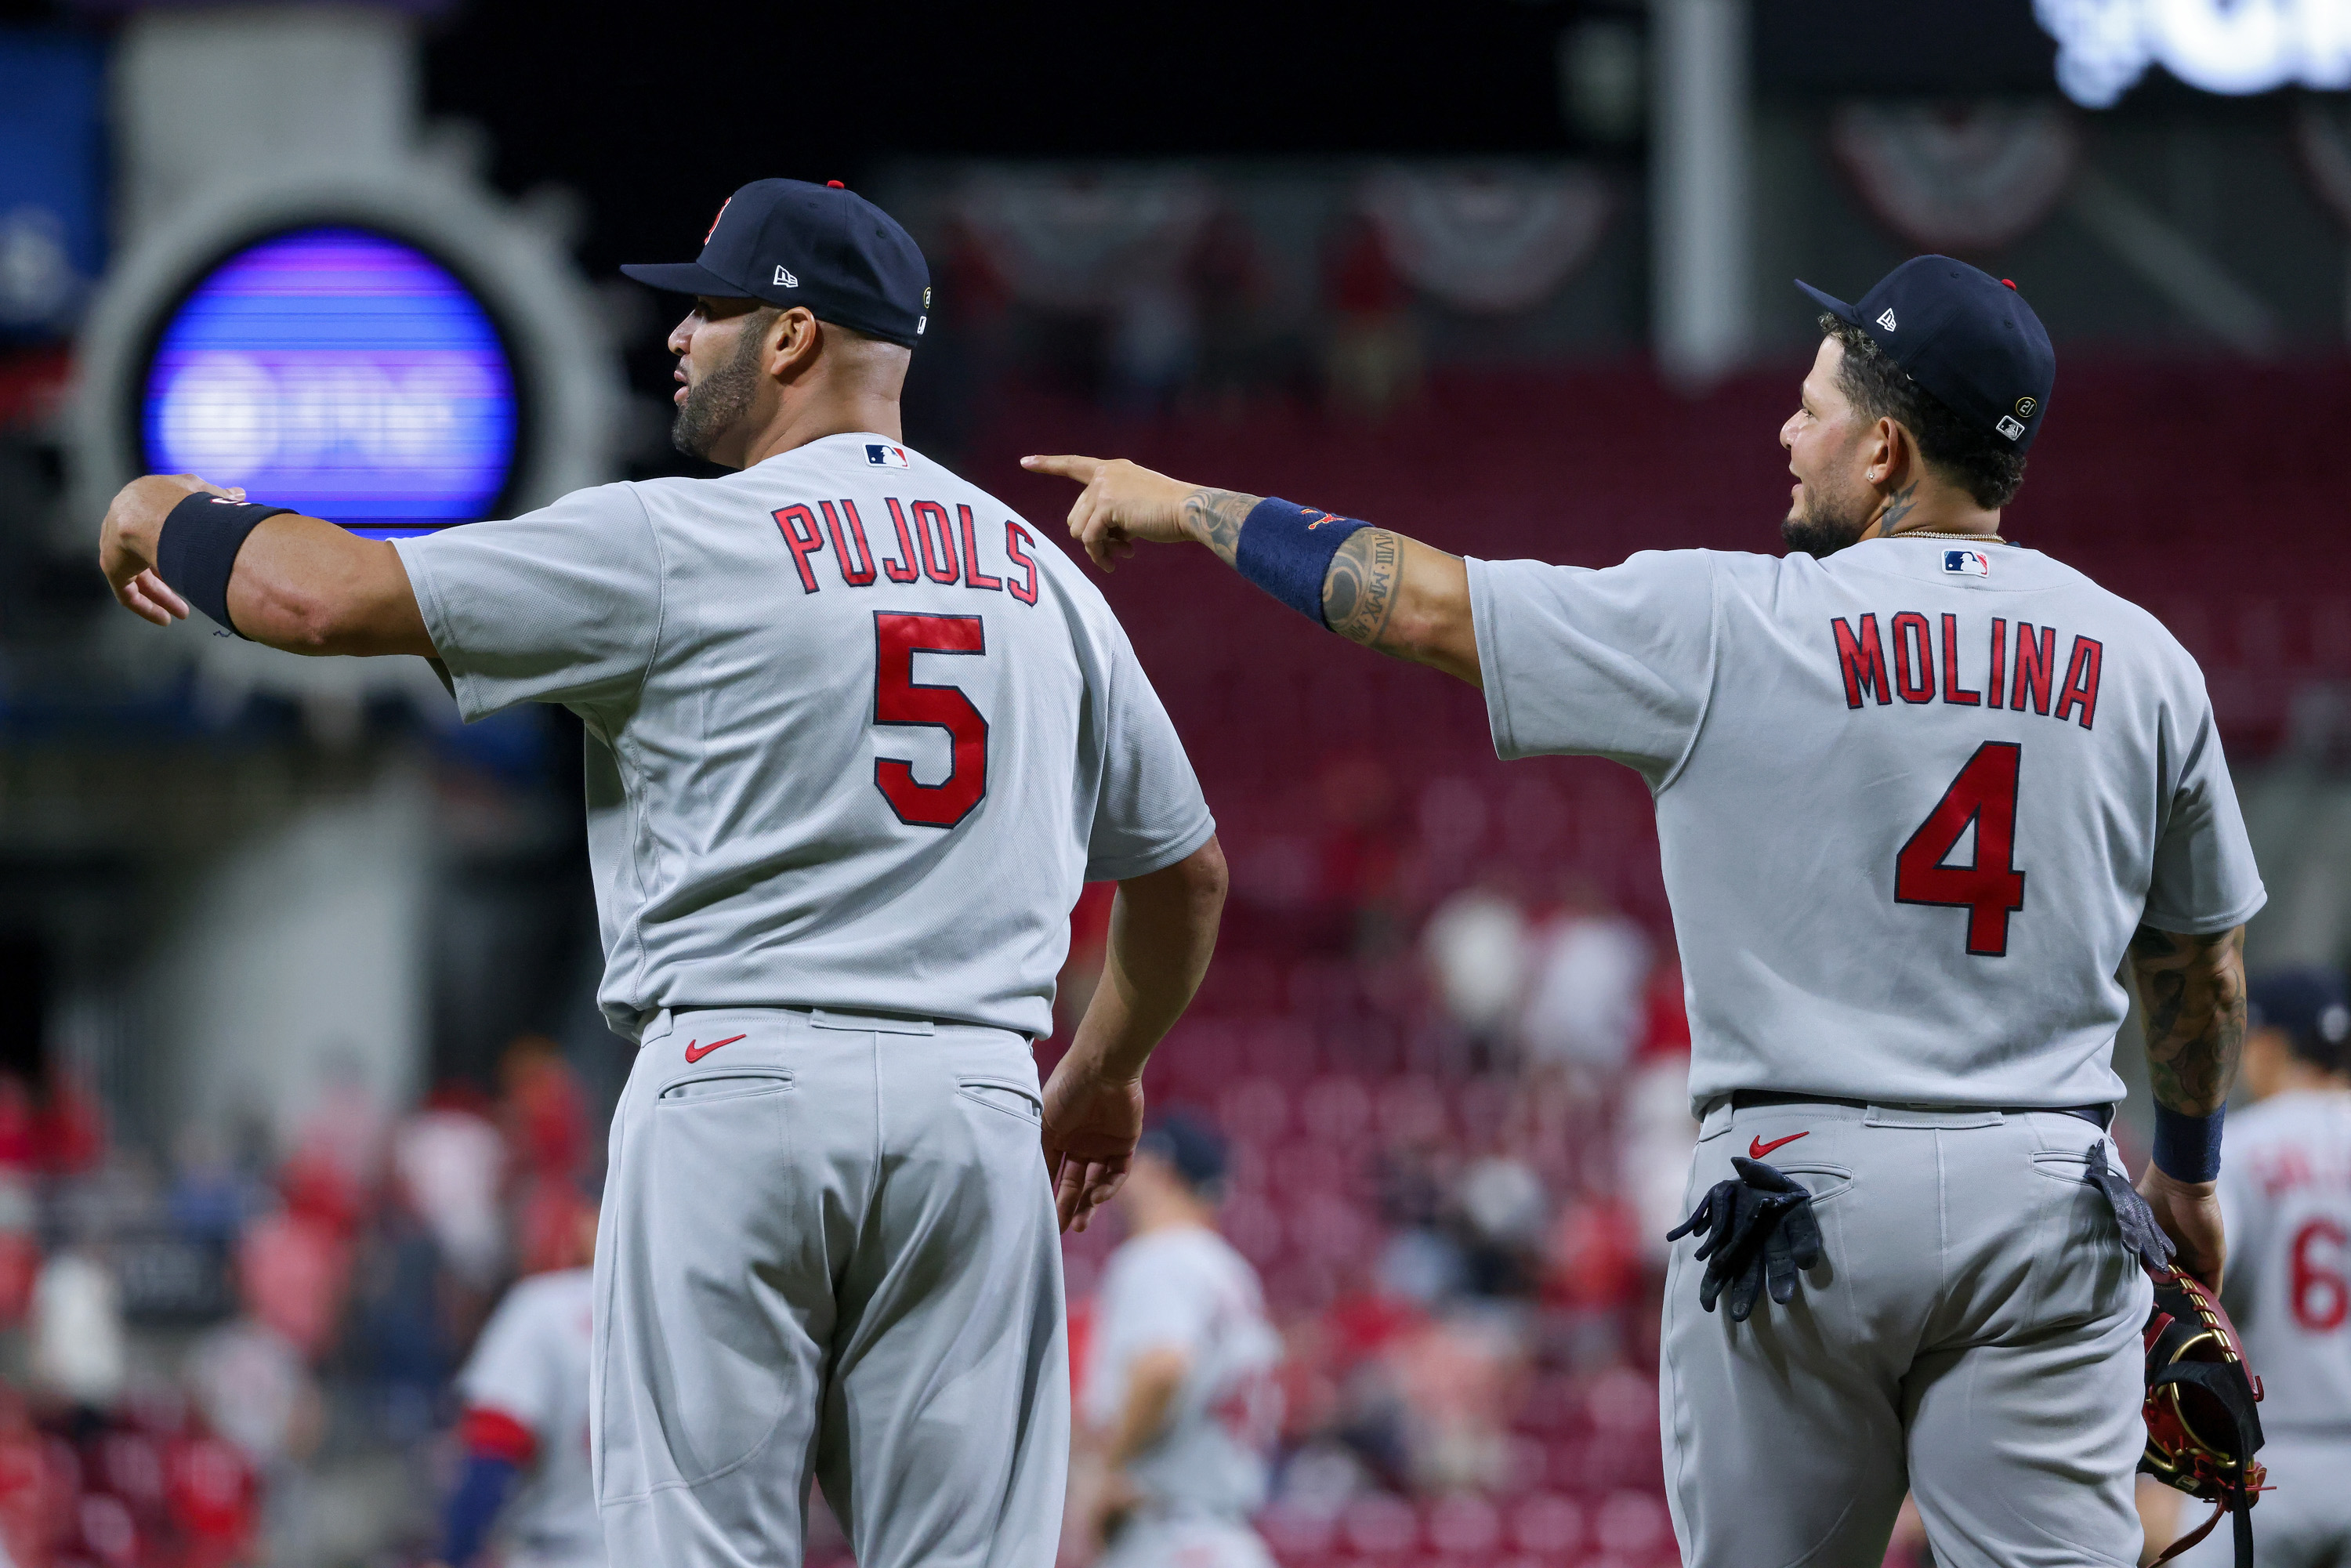 Could Nostalgia Hold the St. Louis Cardinals Back This Season?